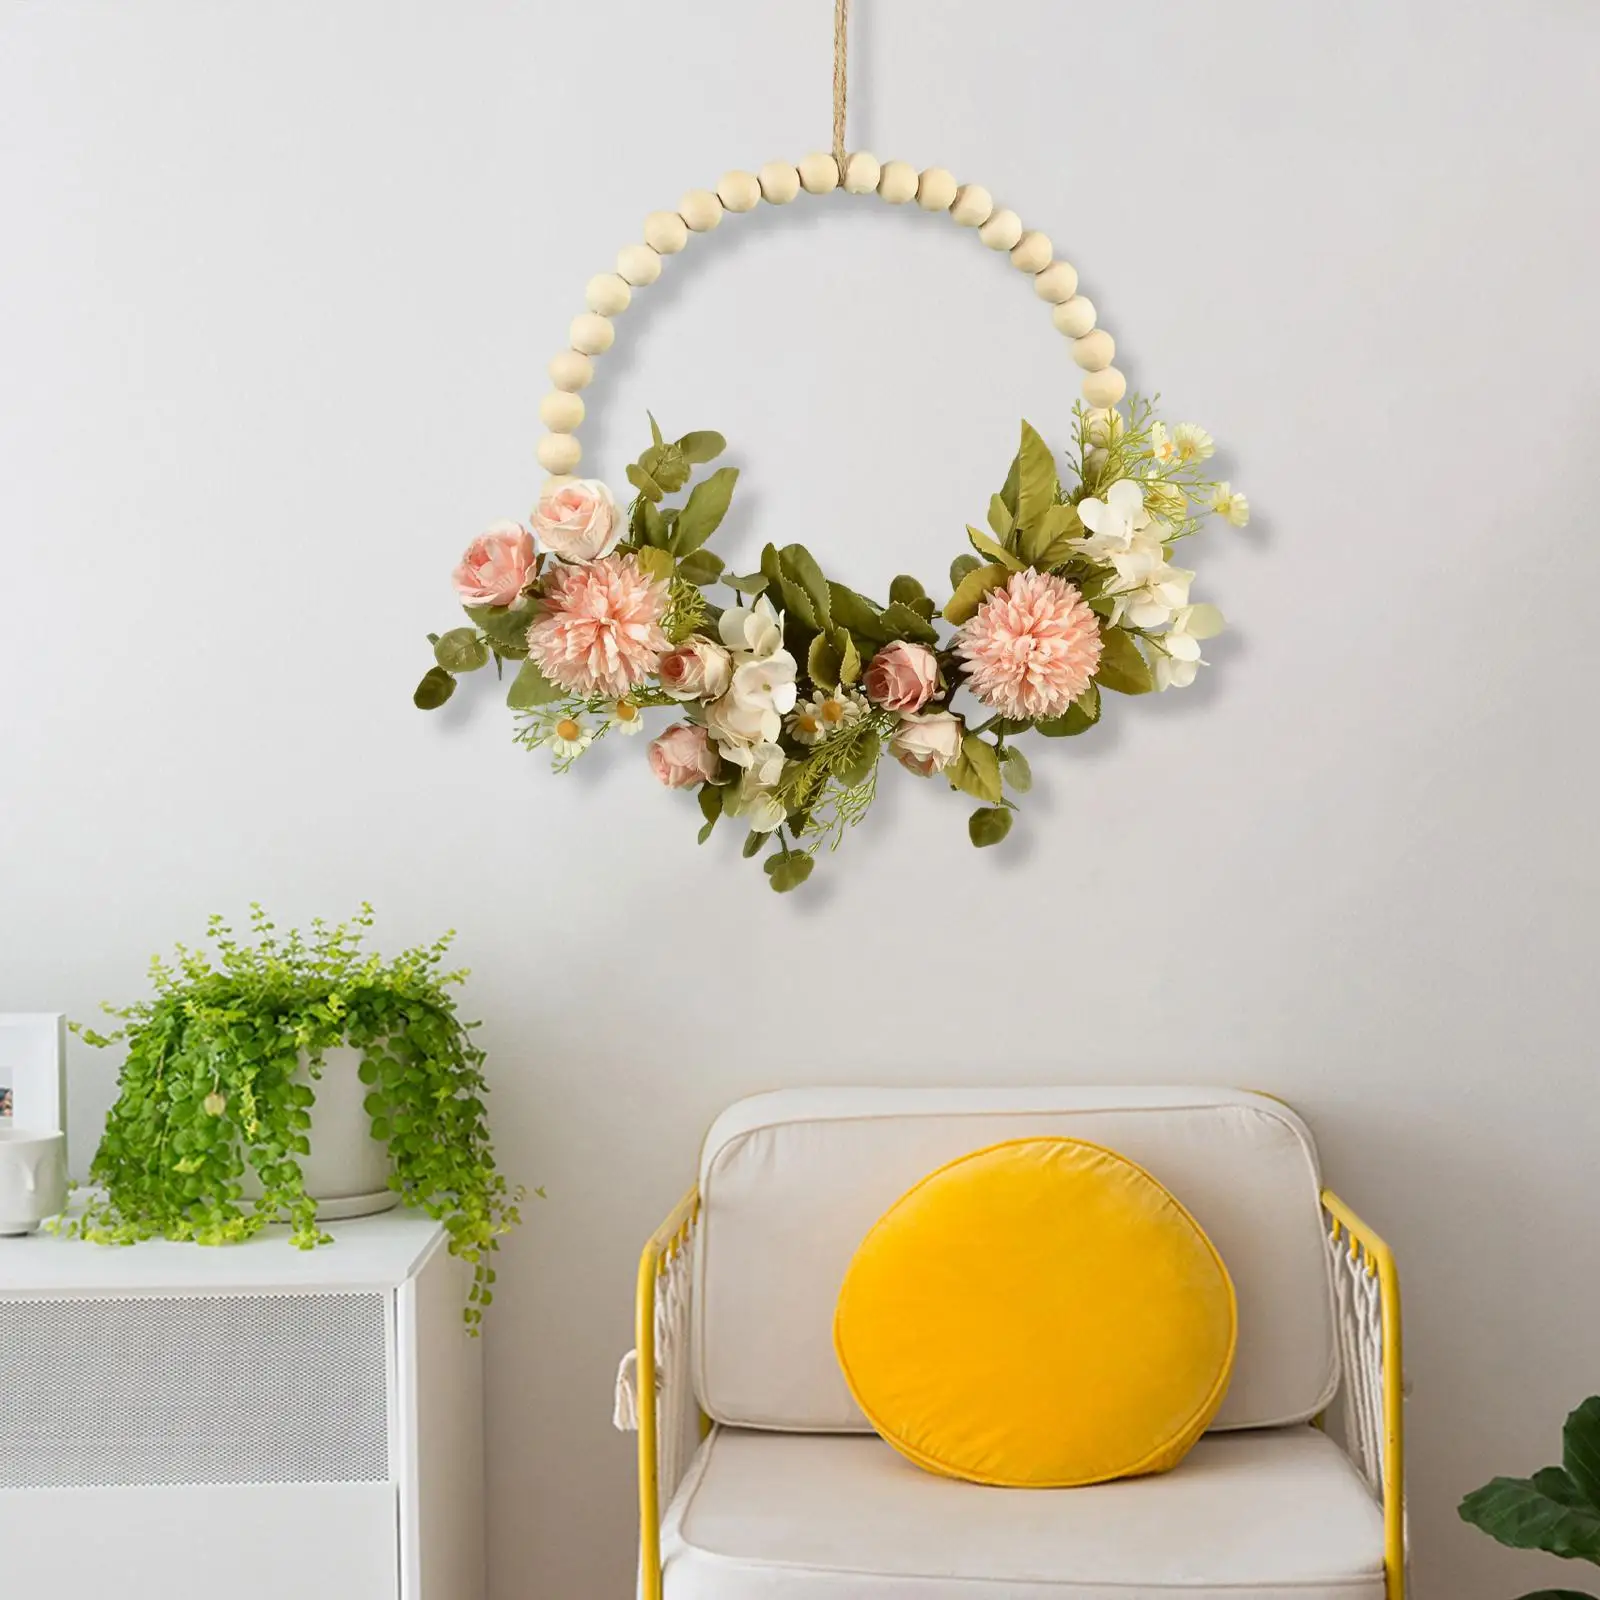 Artificial Flower Wreath Door Garland Wooden Beads Hoop Wall Hanging Greenery Leaves for Backdrop Farmhouse Party Outdoor Decor